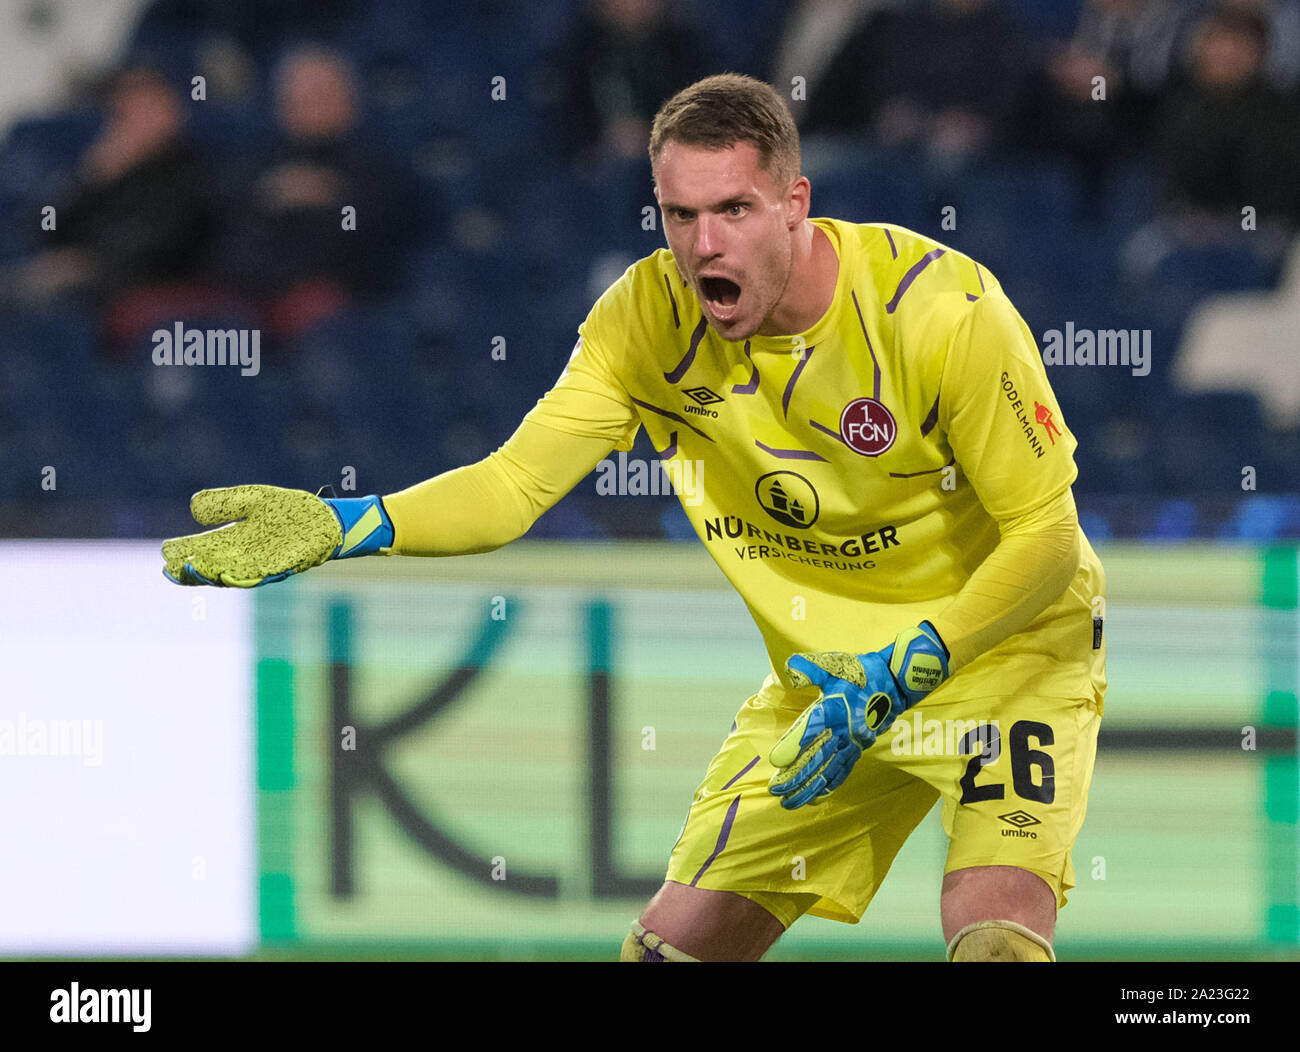 Hanover, Germany. 30th Sep, 2019. Soccer: 2nd Bundesliga, 8th matchday: Hannover 96 - 1st FC Nürnberg in the HDI-Arena in Hannover. Nuremberg goalkeeper Christian Mathenia is in goal. Credit: Peter Steffen/dpa - IMPORTANT NOTE: In accordance with the requirements of the DFL Deutsche Fußball Liga or the DFB Deutscher Fußball-Bund, it is prohibited to use or have used photographs taken in the stadium and/or the match in the form of sequence images and/or video-like photo sequences./dpa/Alamy Live News Stock Photo